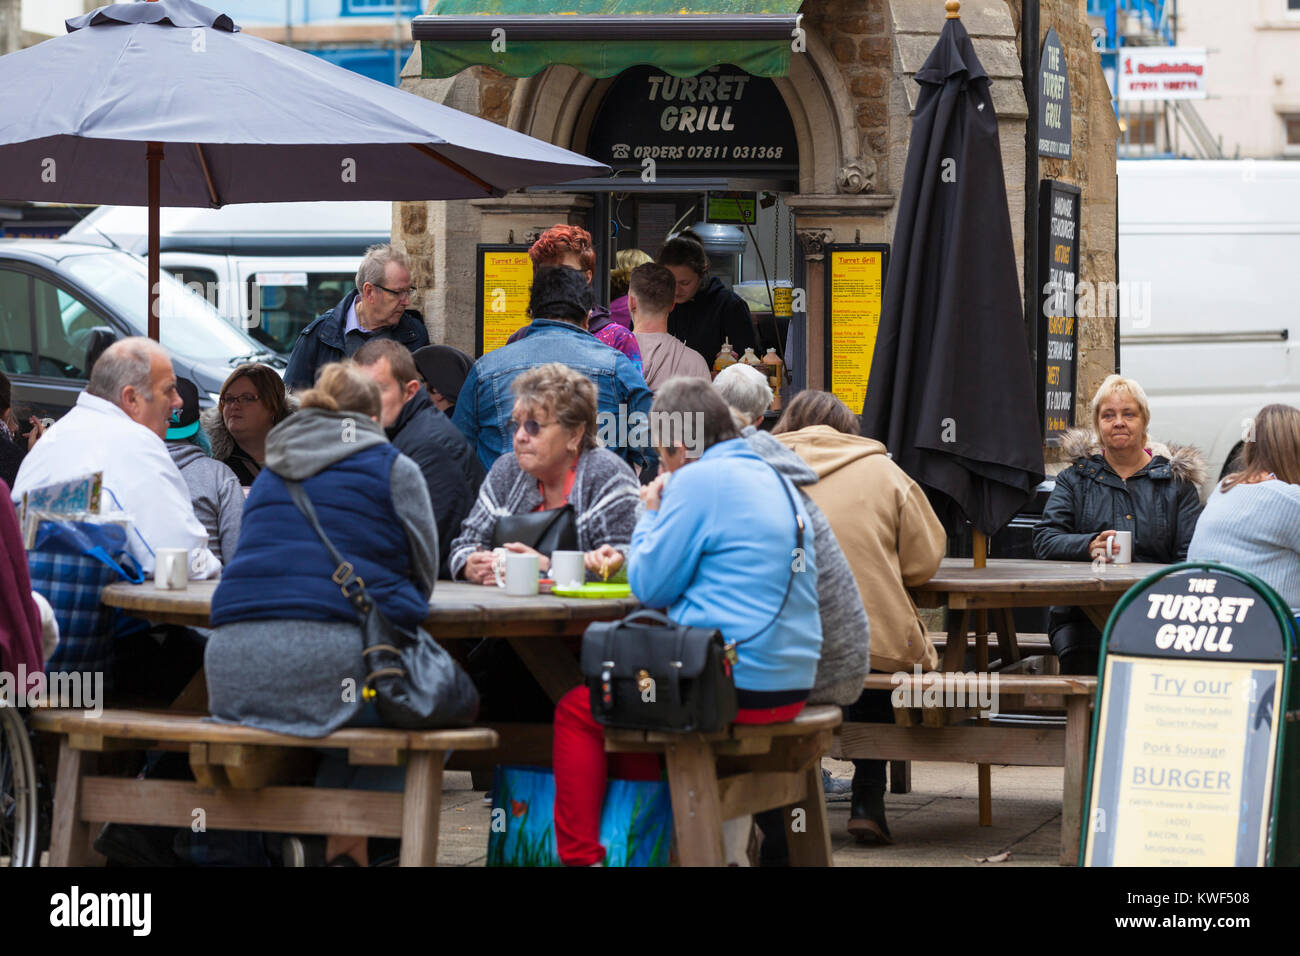 Turret grill, people eating outside, hastings, east sussex, uk Stock Photo